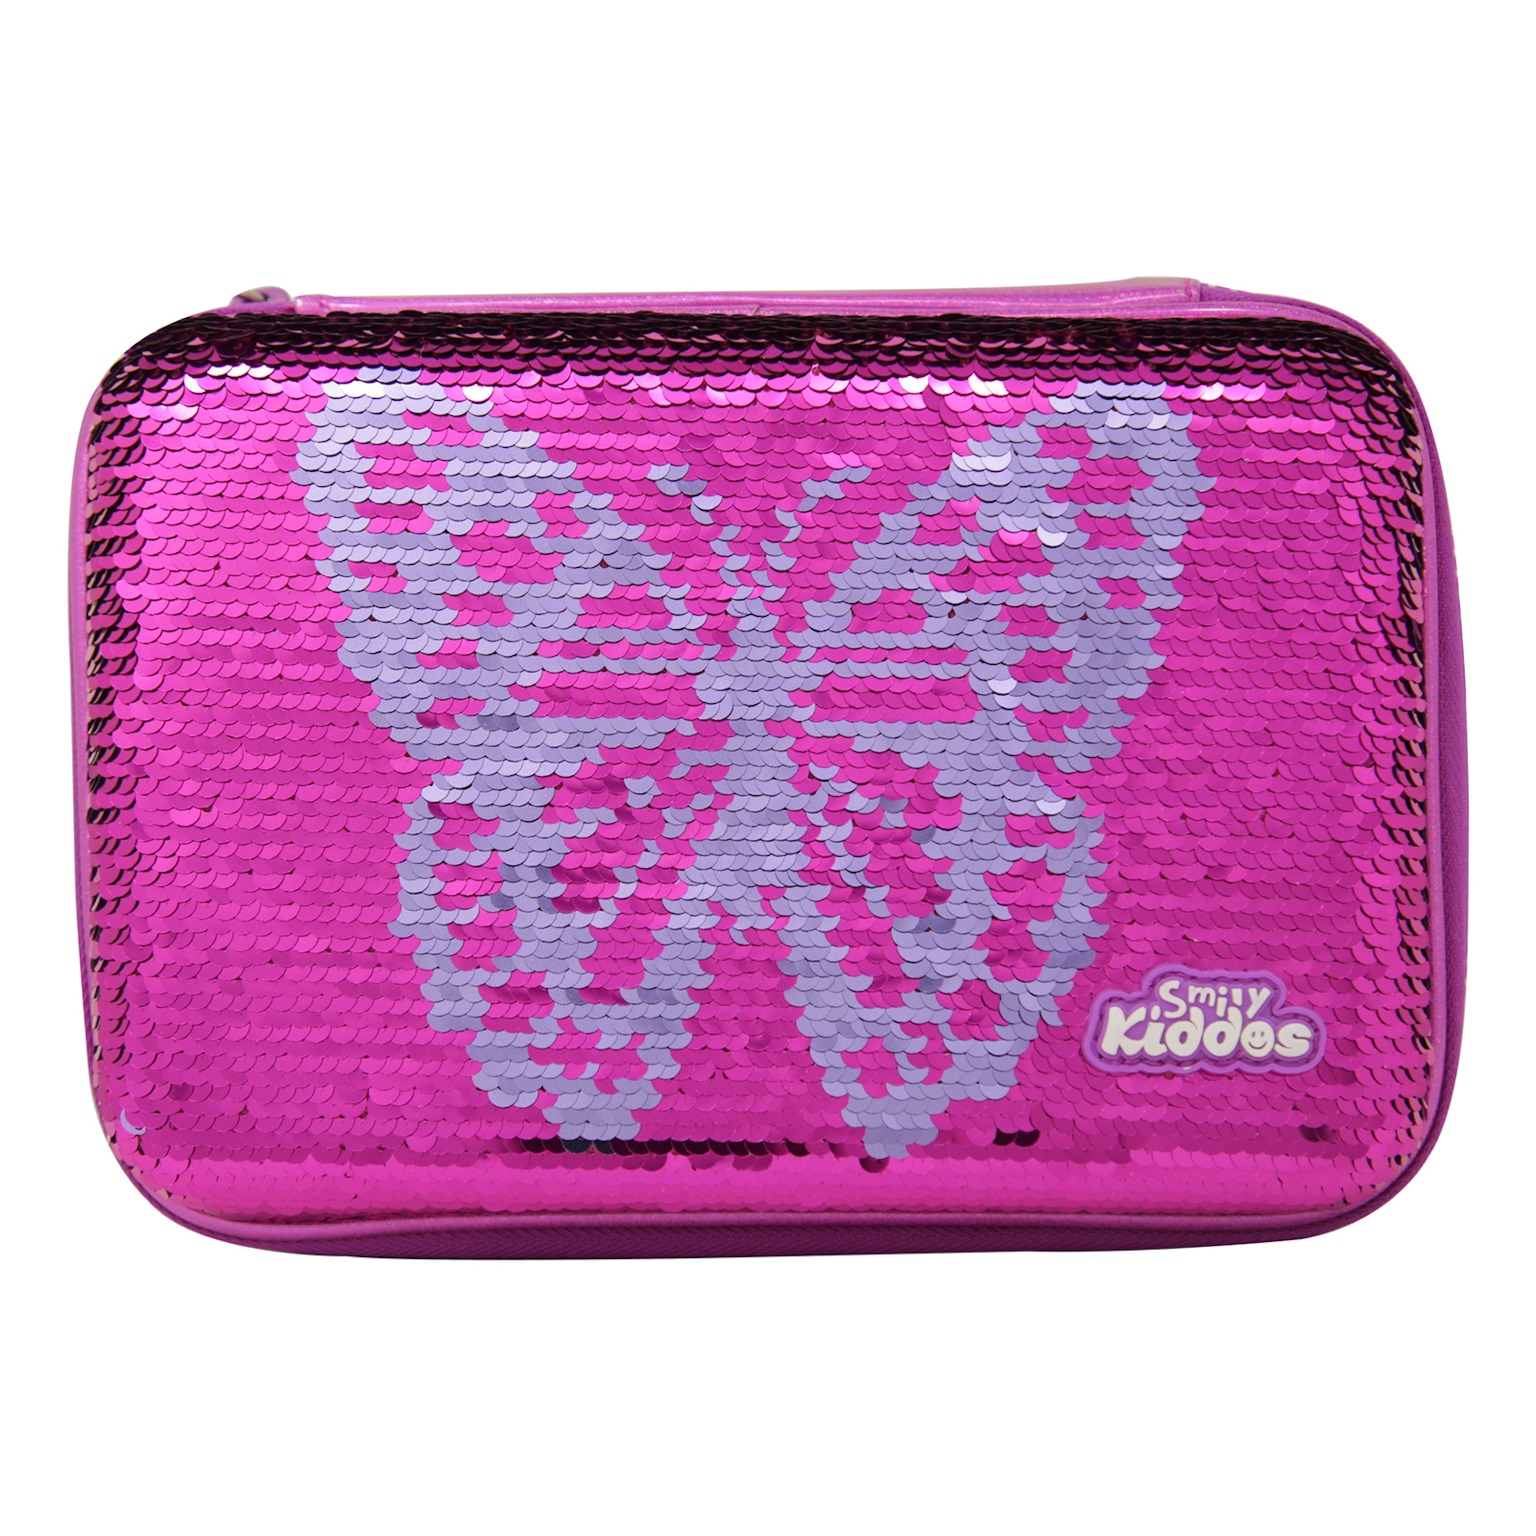 Smily Bling butterfly pencil case 